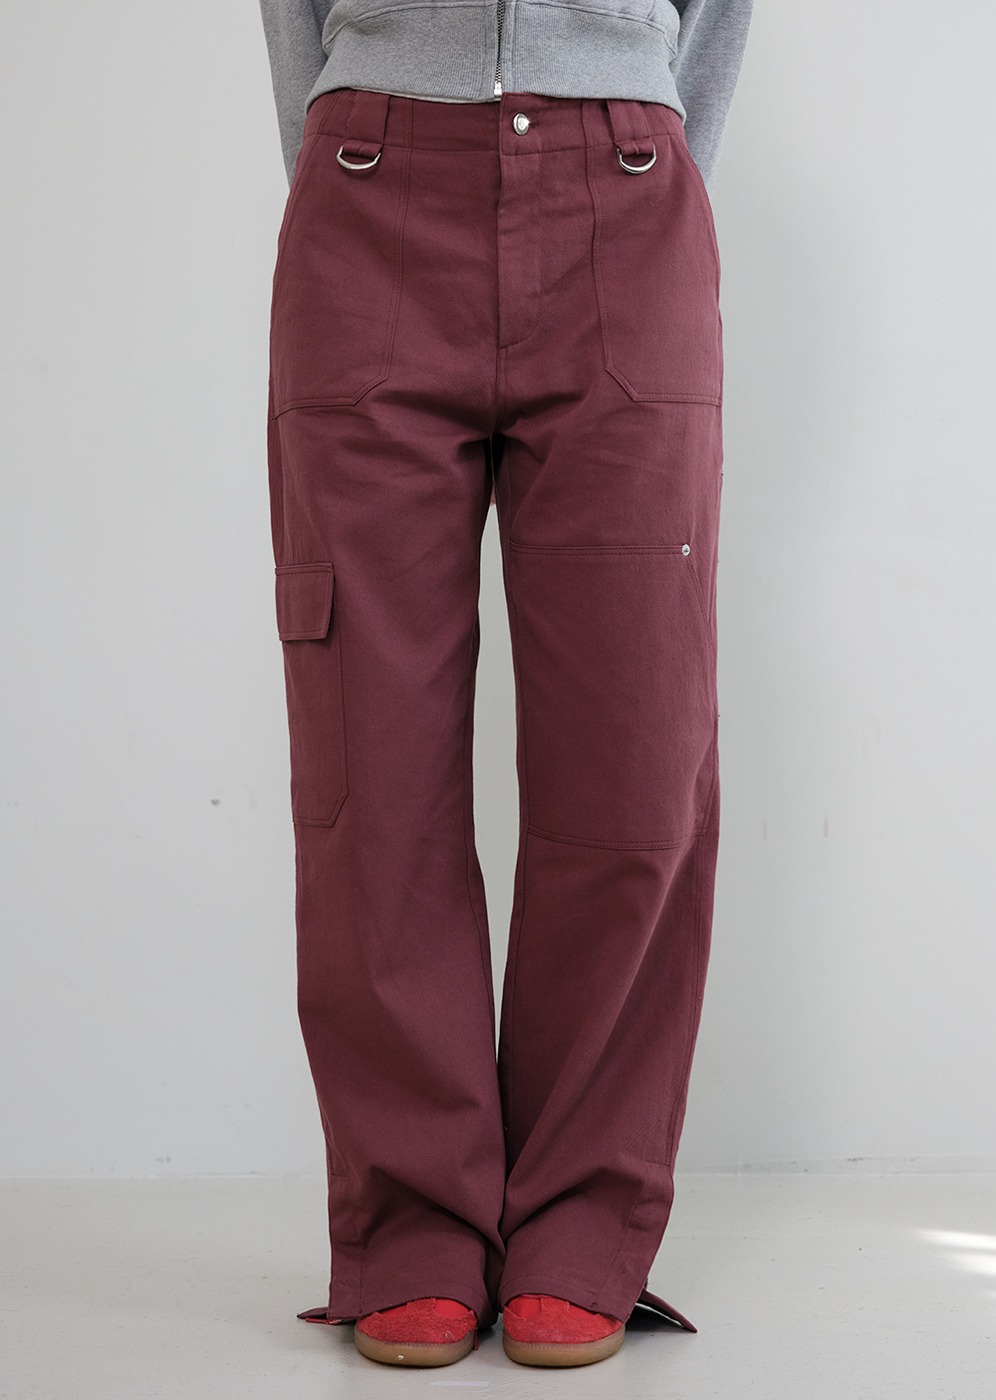 Button Pocket Wide Cargo Pants [RED BROWN]Button Pocket Wide Cargo Pants [RED BROWN]자체브랜드